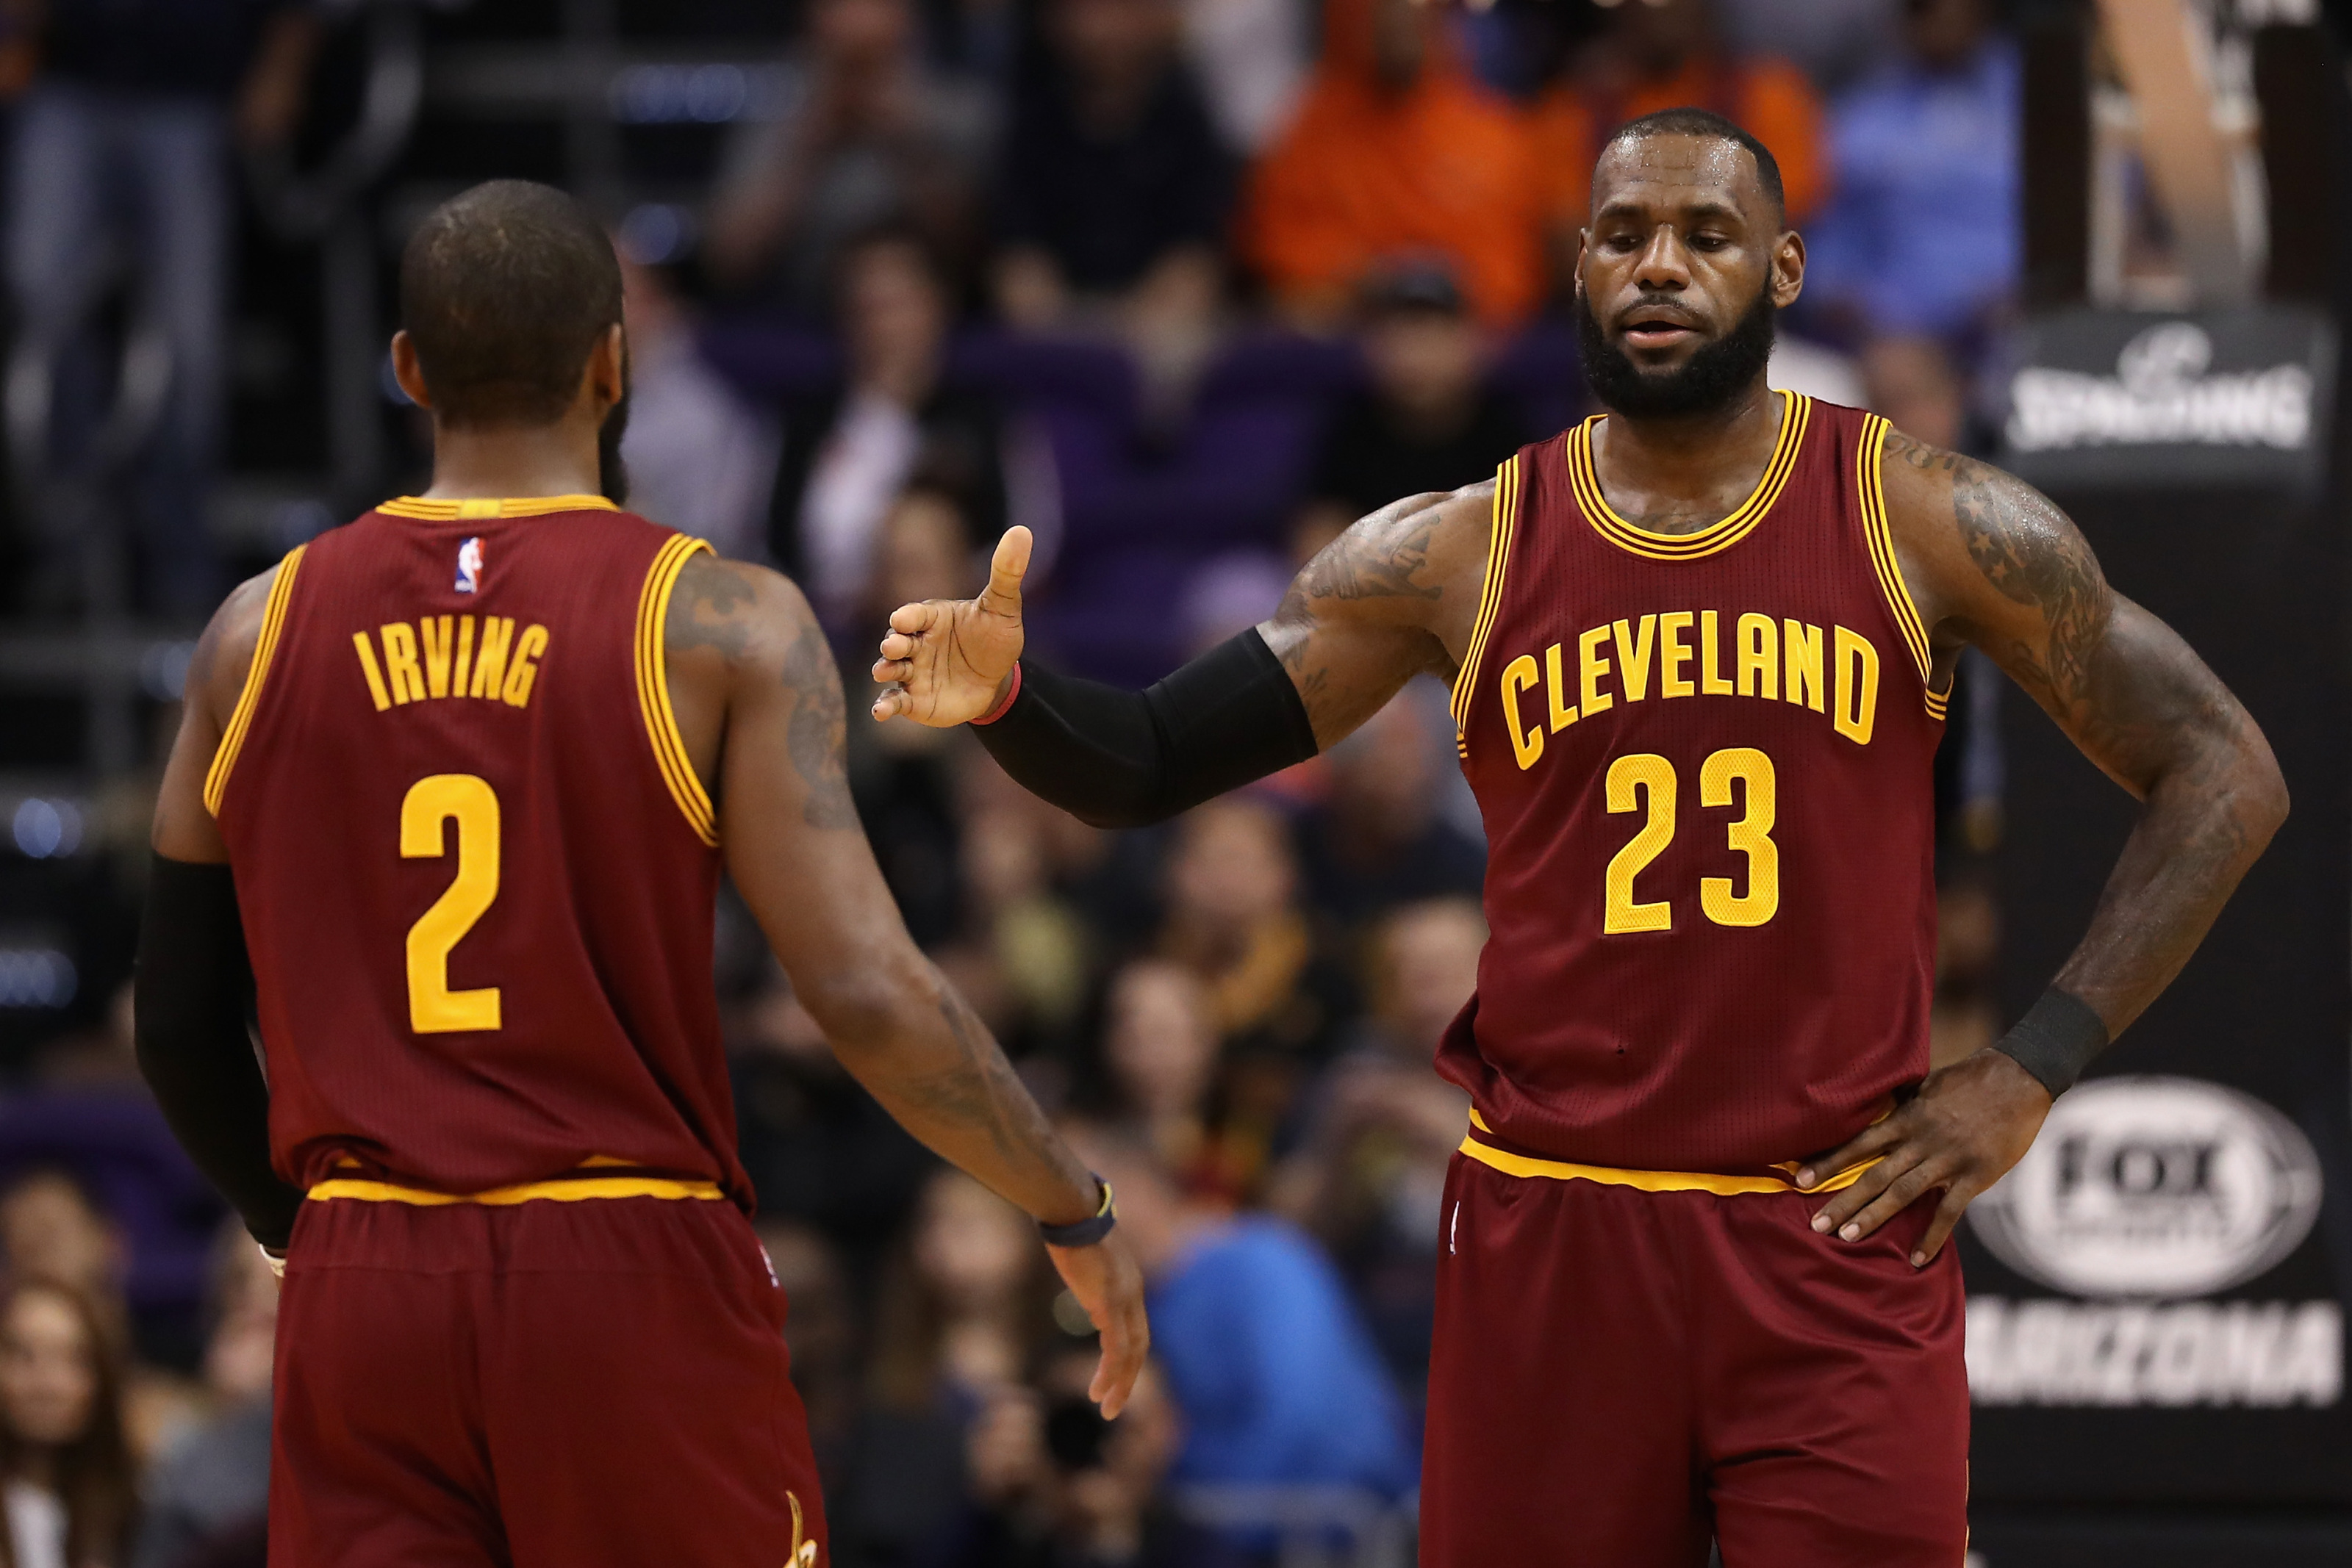 Who are the active players on the NBA 75 team? LeBron James